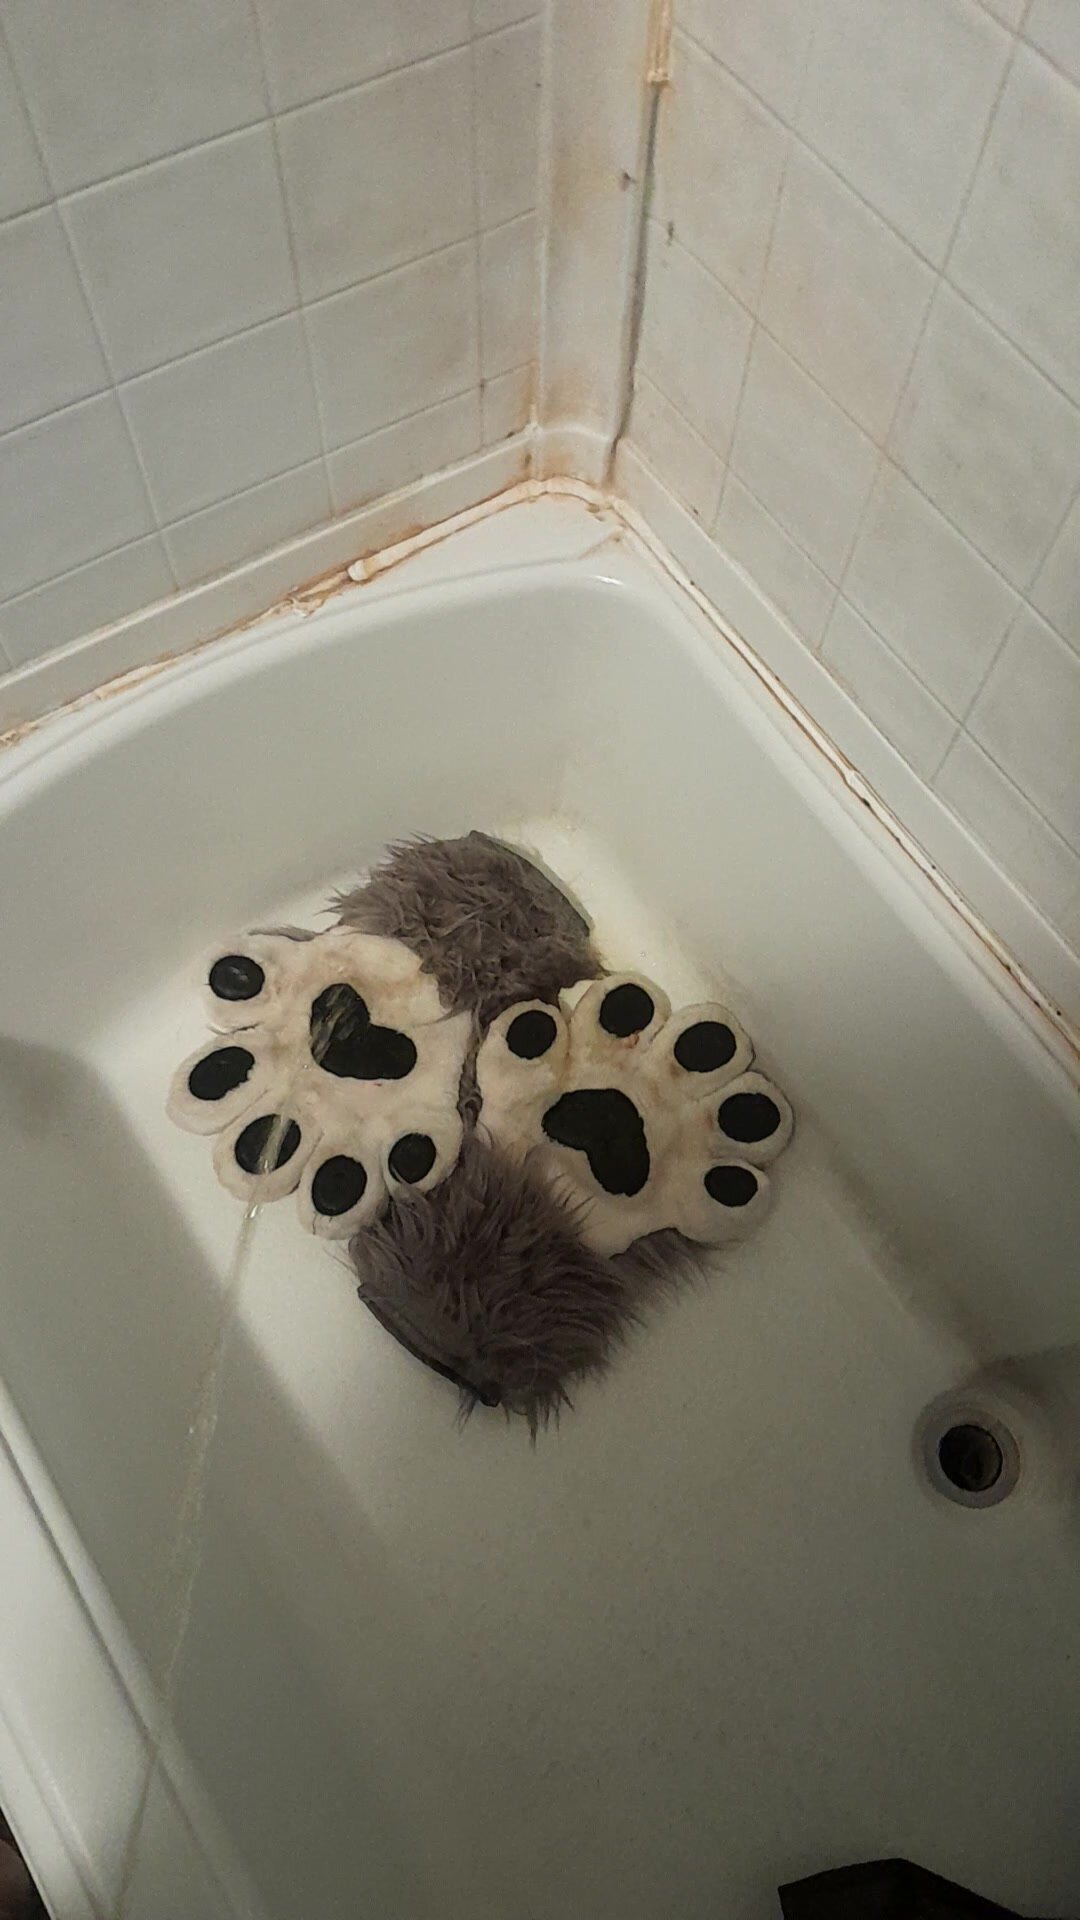 Pissing on some fursuitpaws